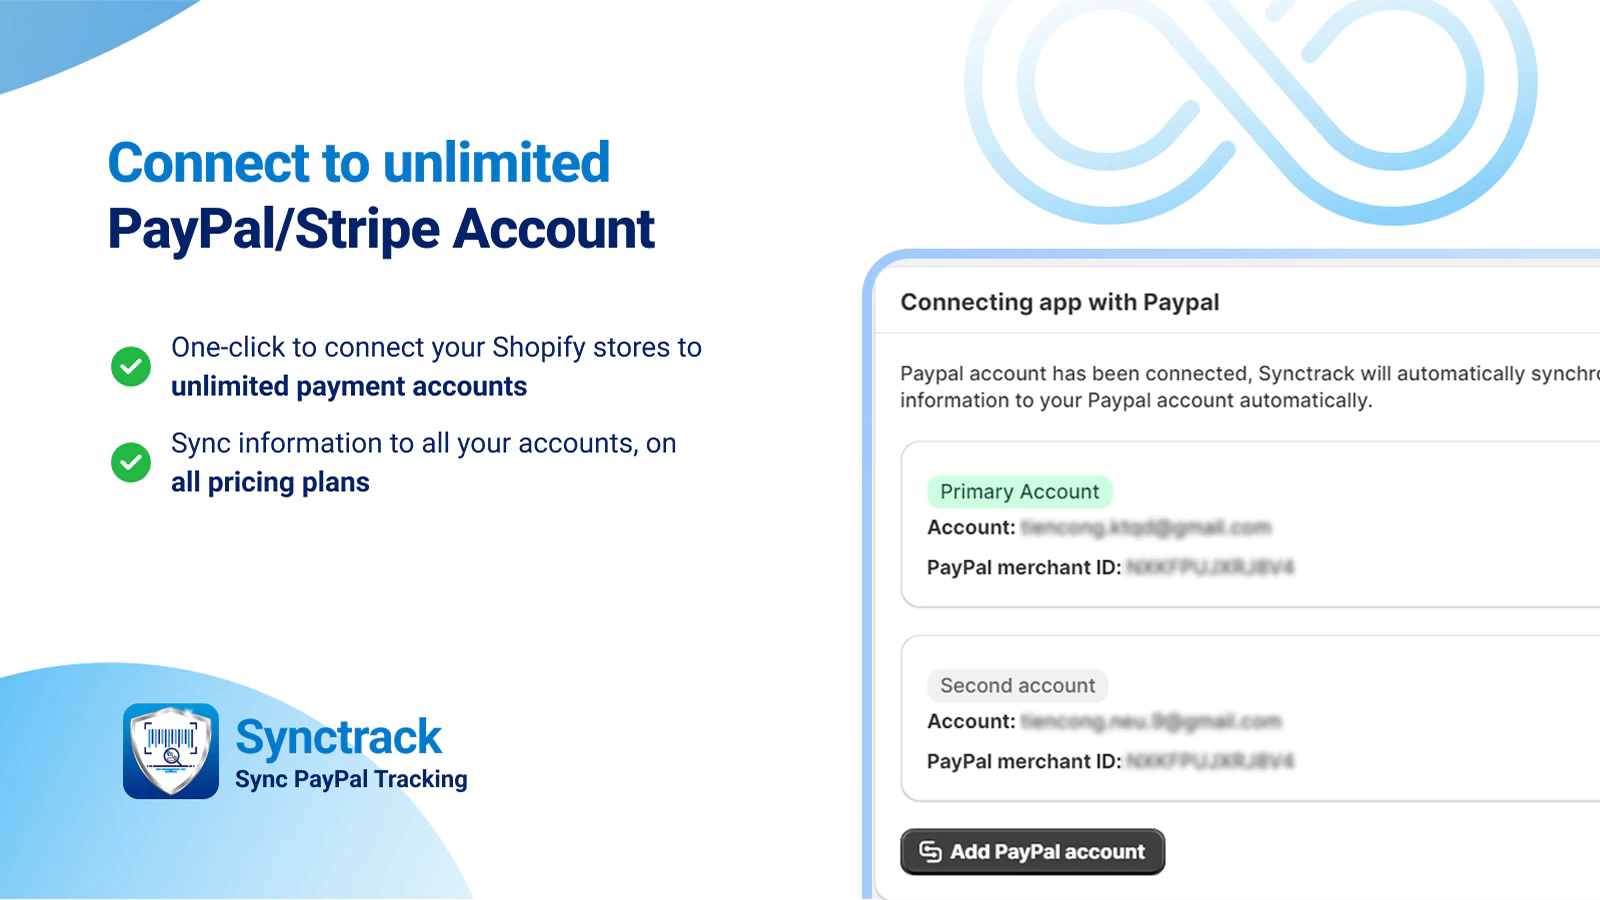 synctrack-paypal-tracking-sync-app-connect-stripe